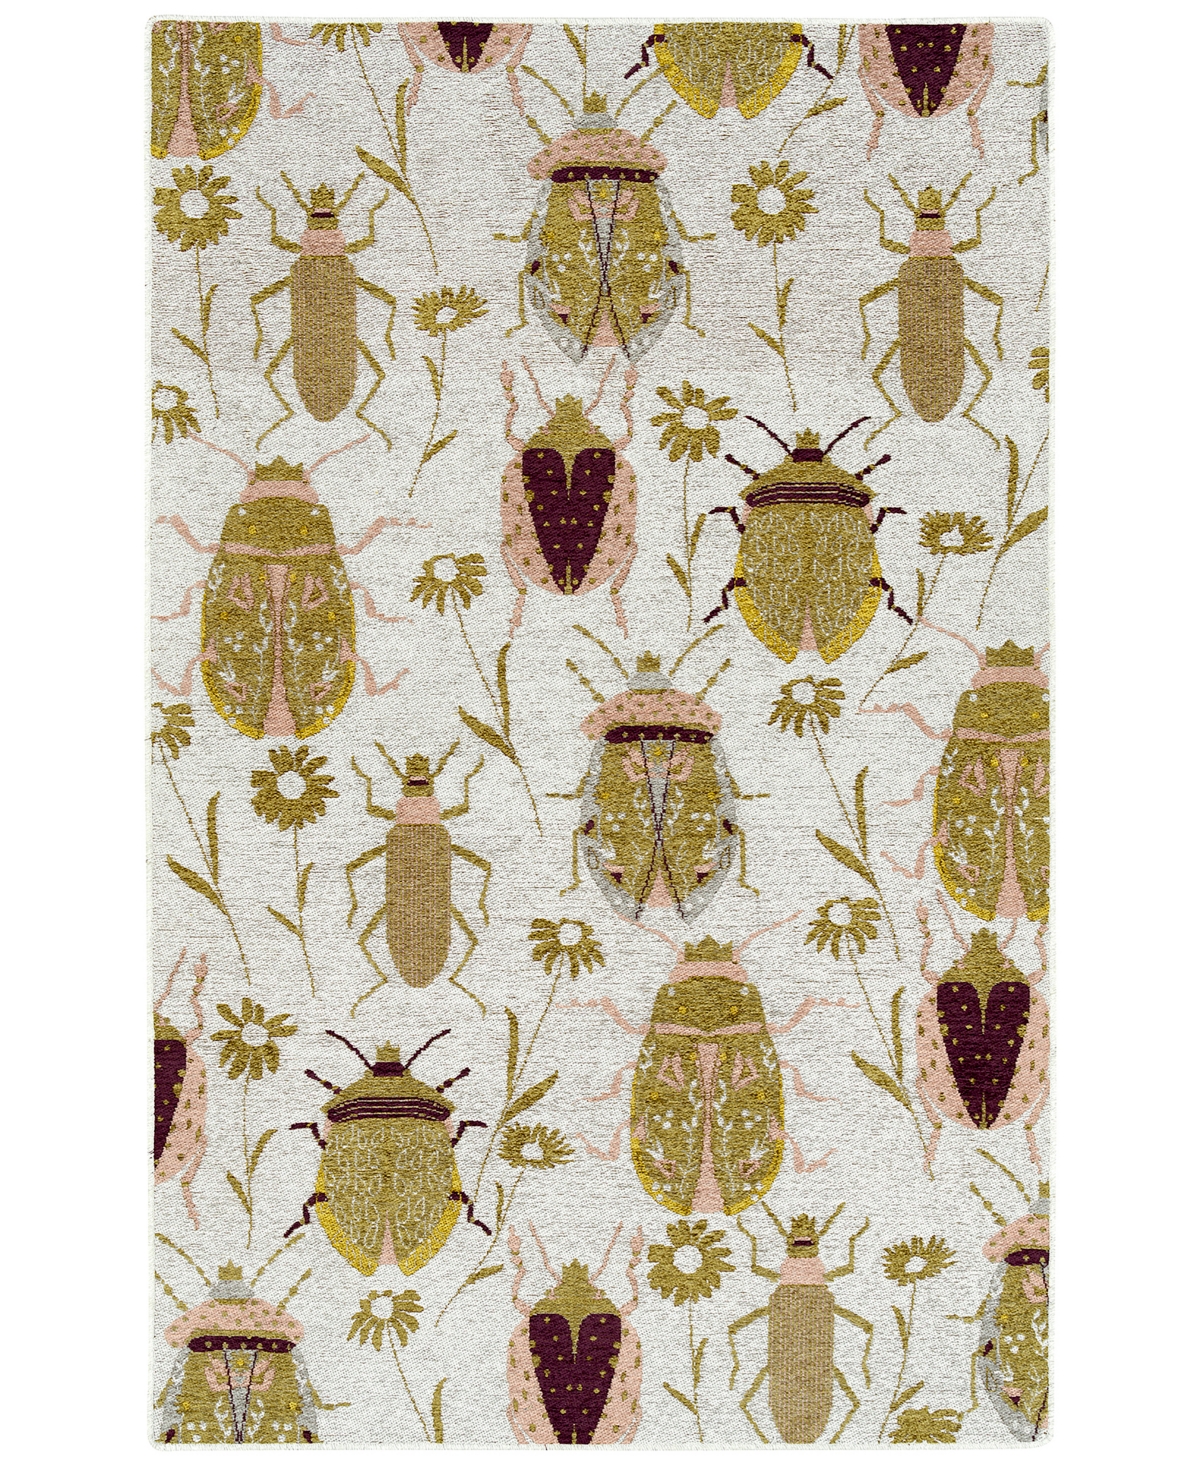 Hilary Farr Critter Comforts Hcc03-78 2' X 3' Area Rug In Gold-tone